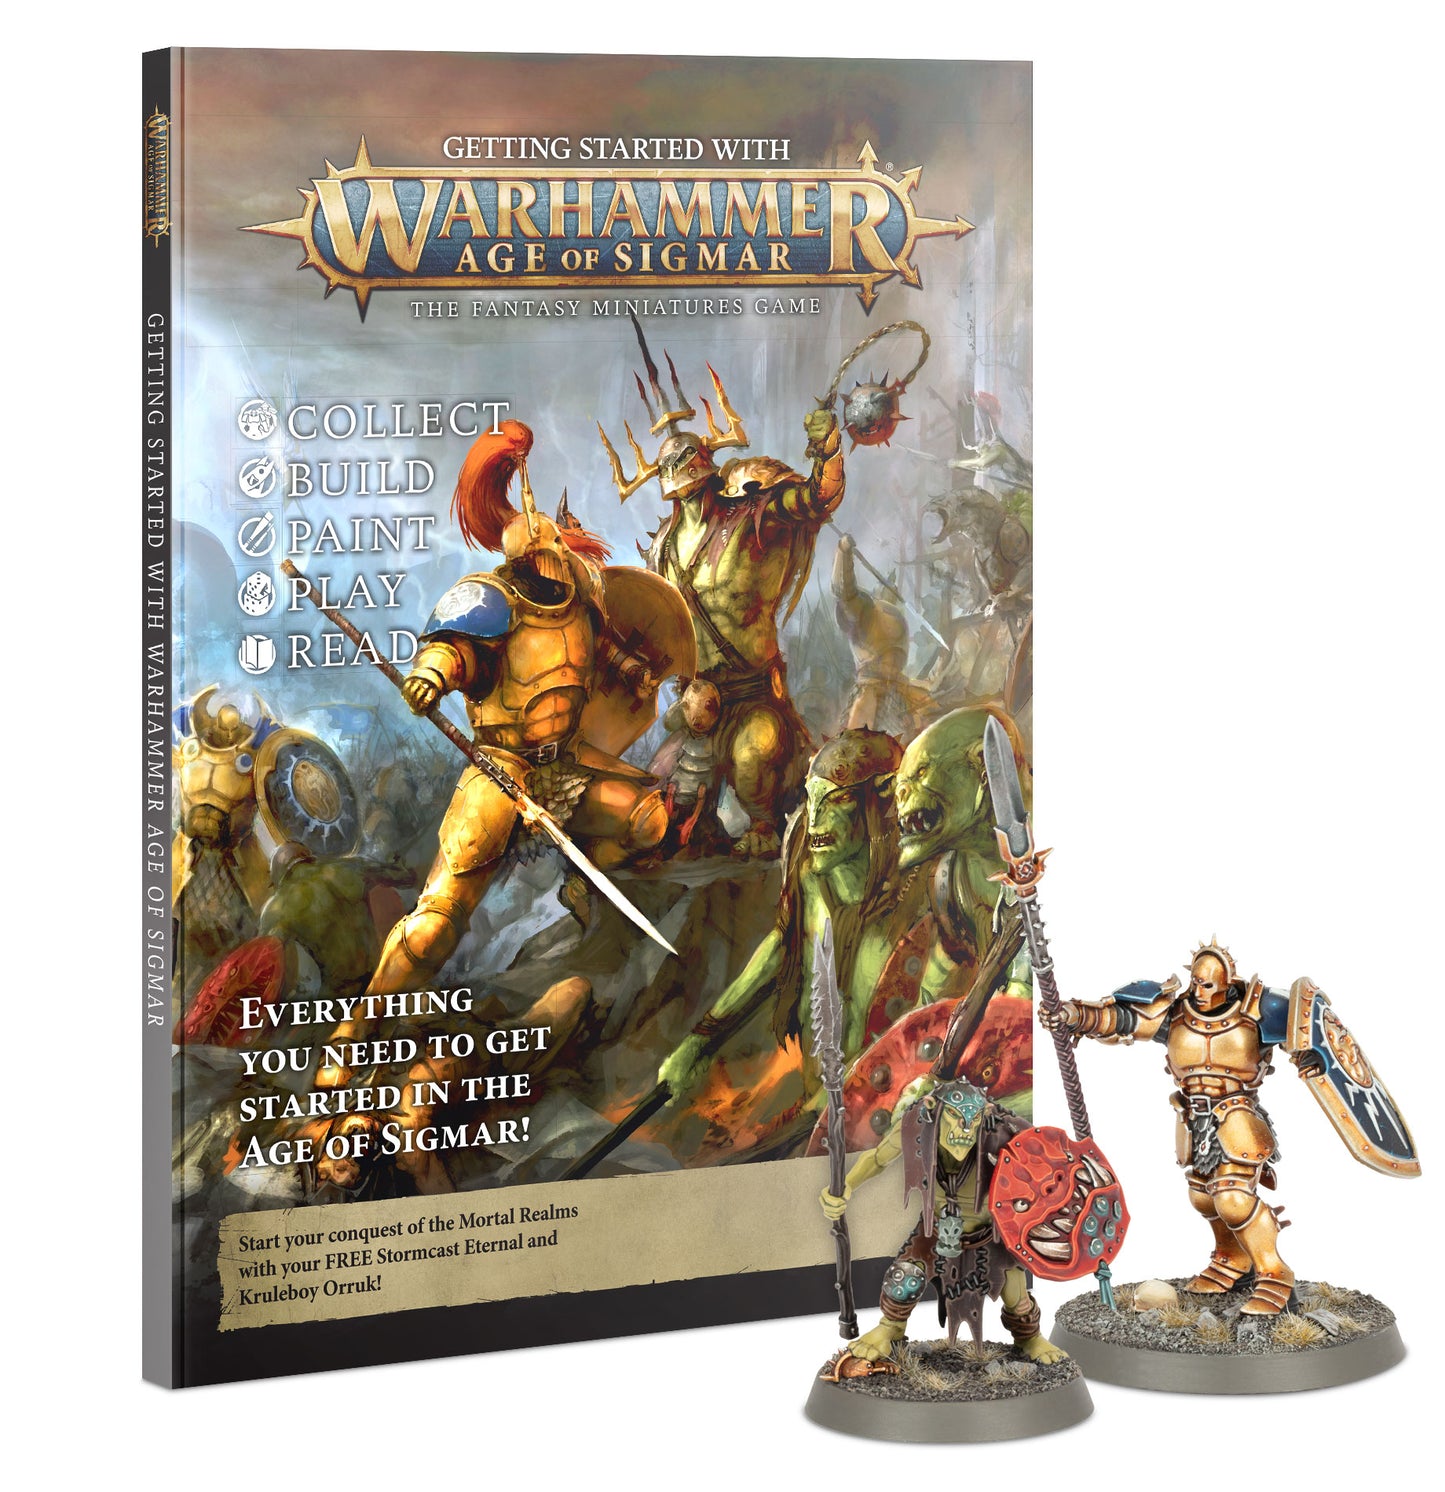 Getting Started With Age of Sigmar 2021